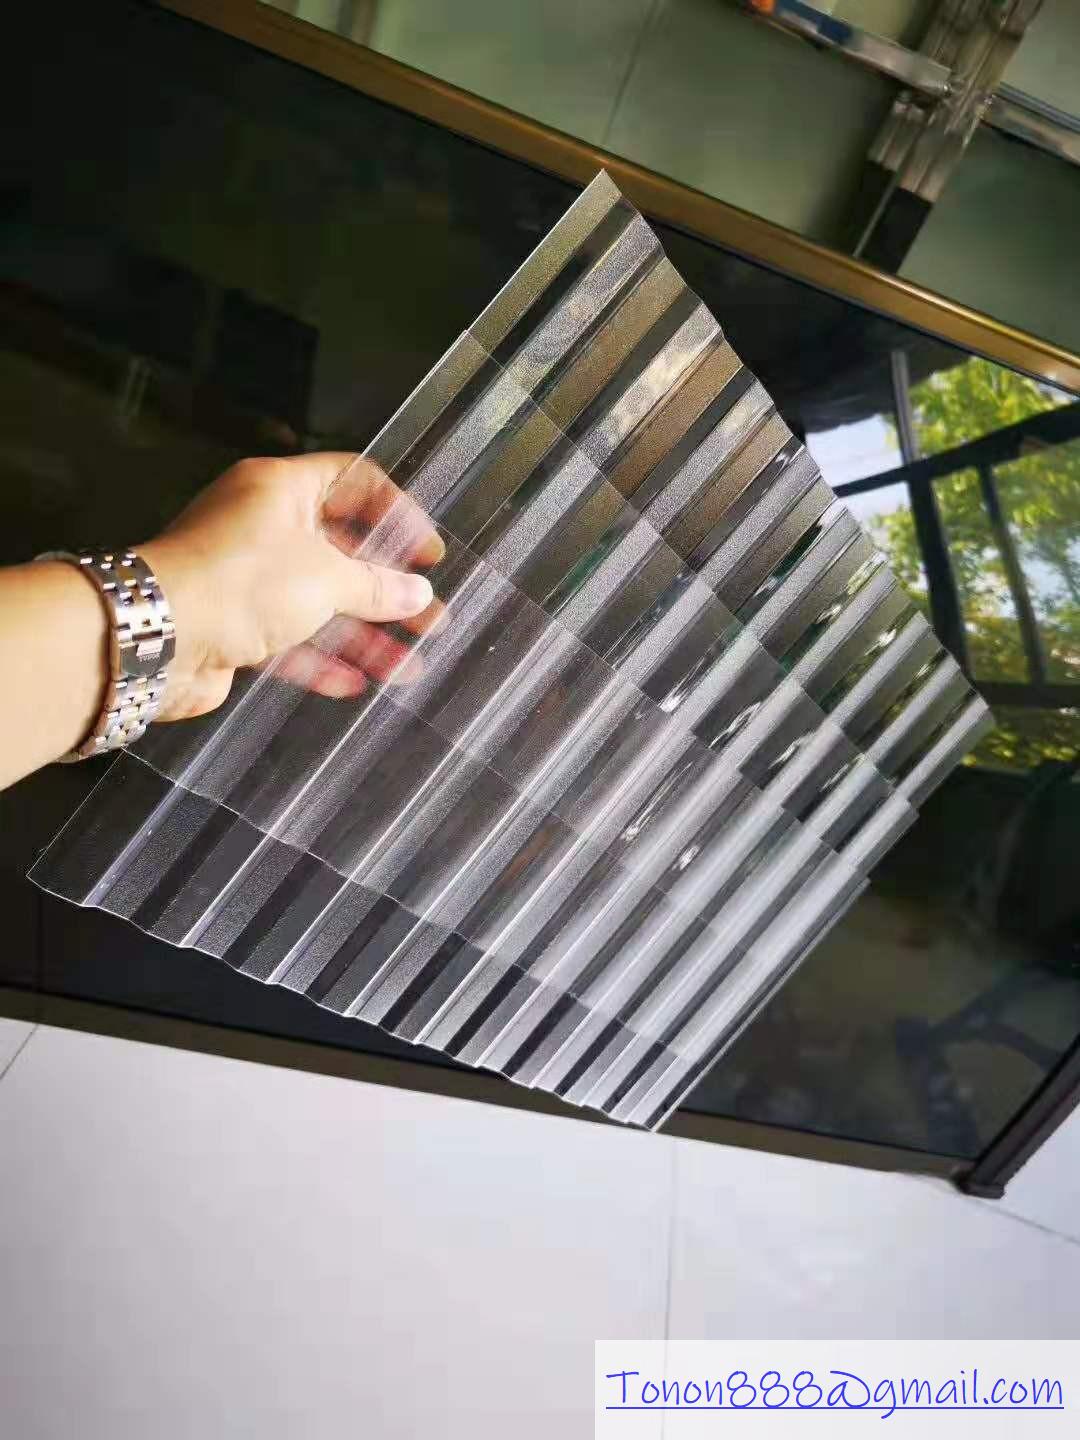 Polycarbonate corrugated and forsted sheet 